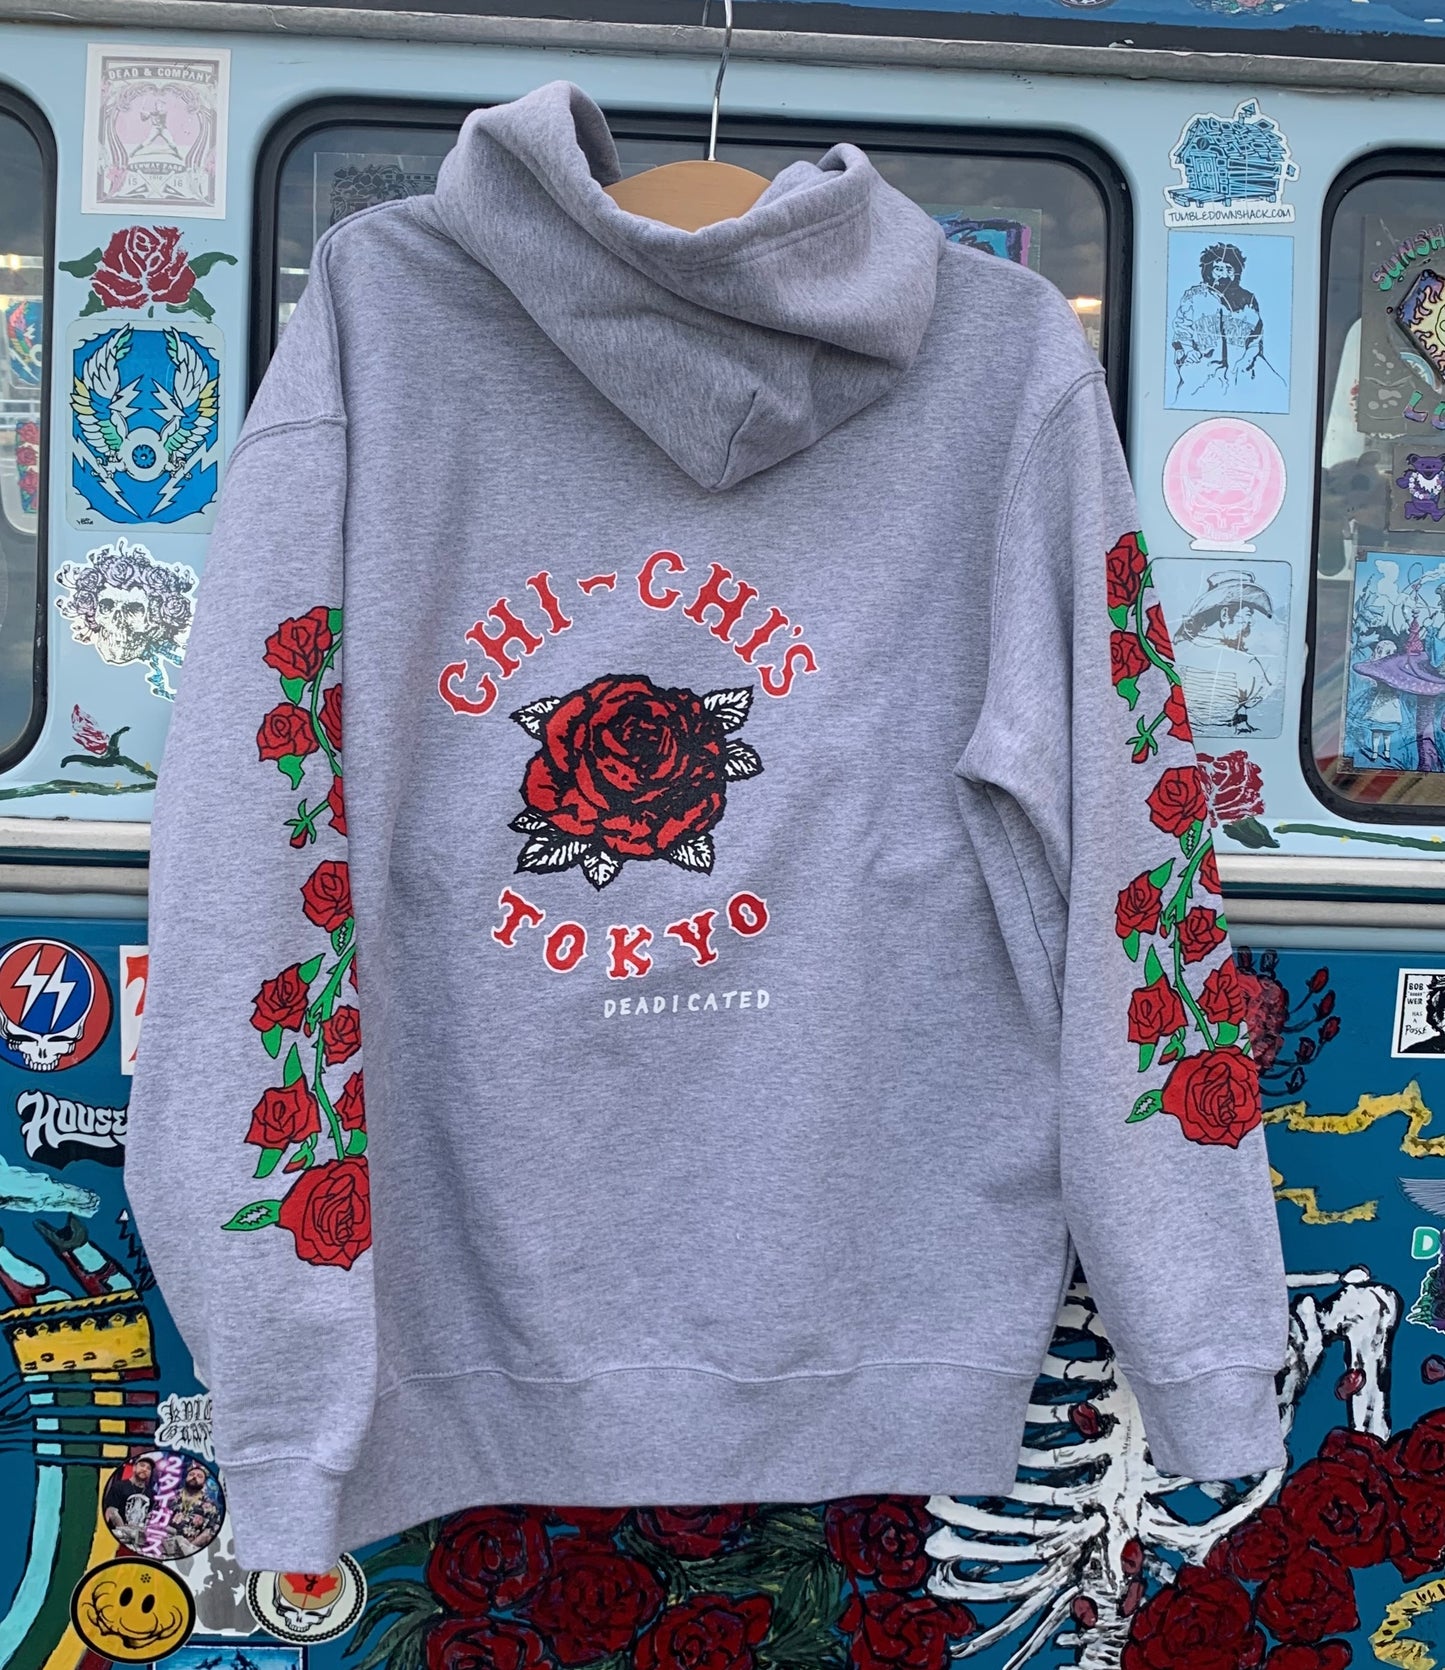 CHI-CHI'S HEAD Pullover Hoodie Gray